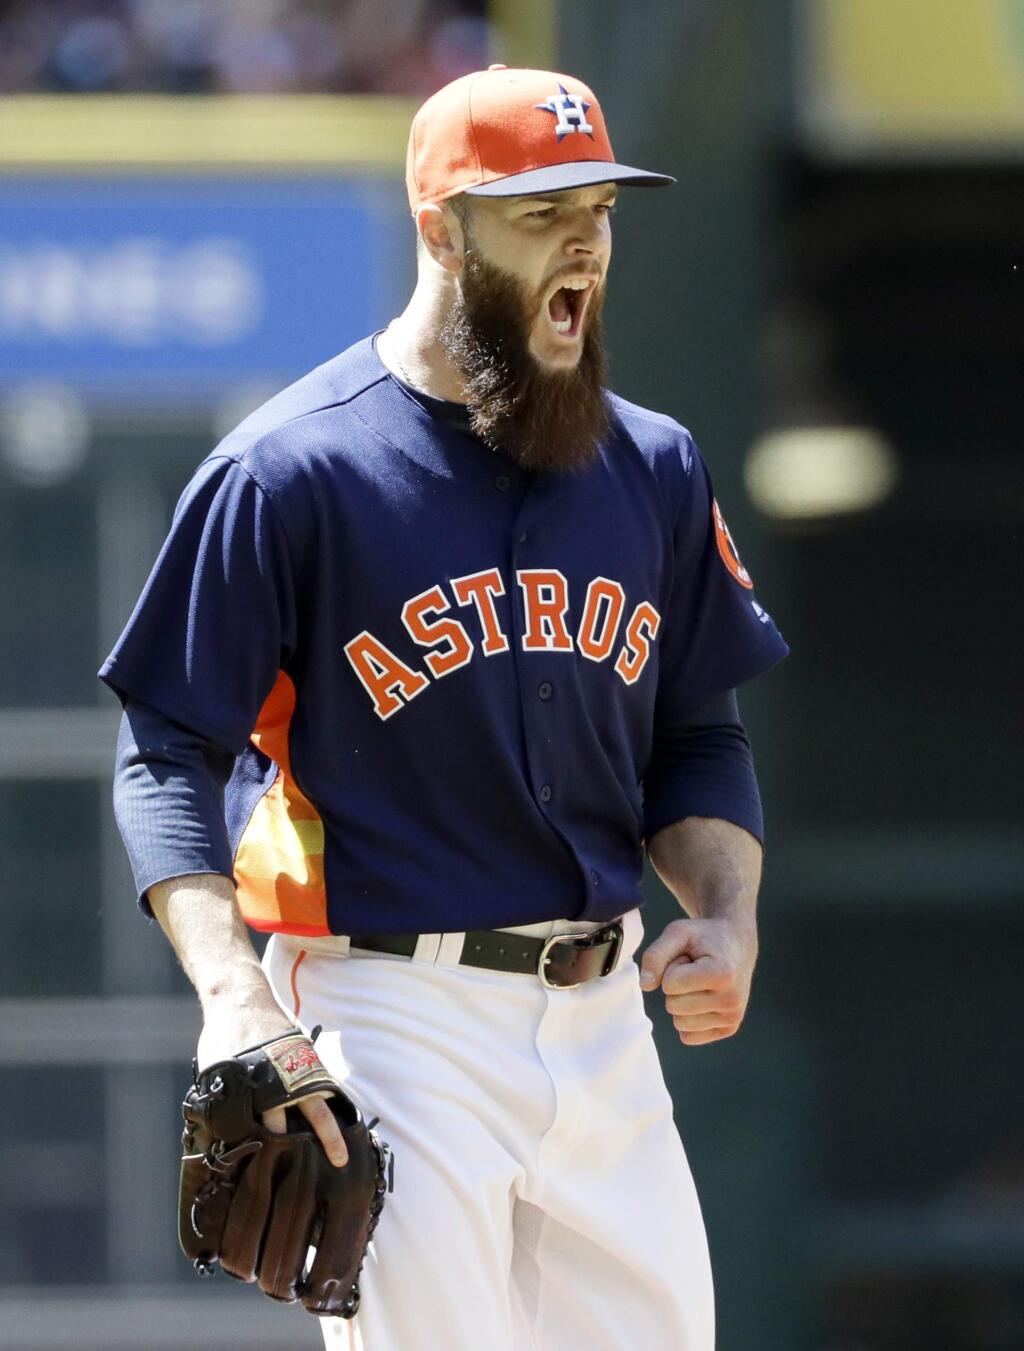 Houston Astros starting pitcher Dallas Keuchel yells after striking out Oakland Athletics' Chad Pinder in the seventh inning of a baseball game Sunday, April 30, 2017, in Houston. (AP Photo/David J. Phillip)